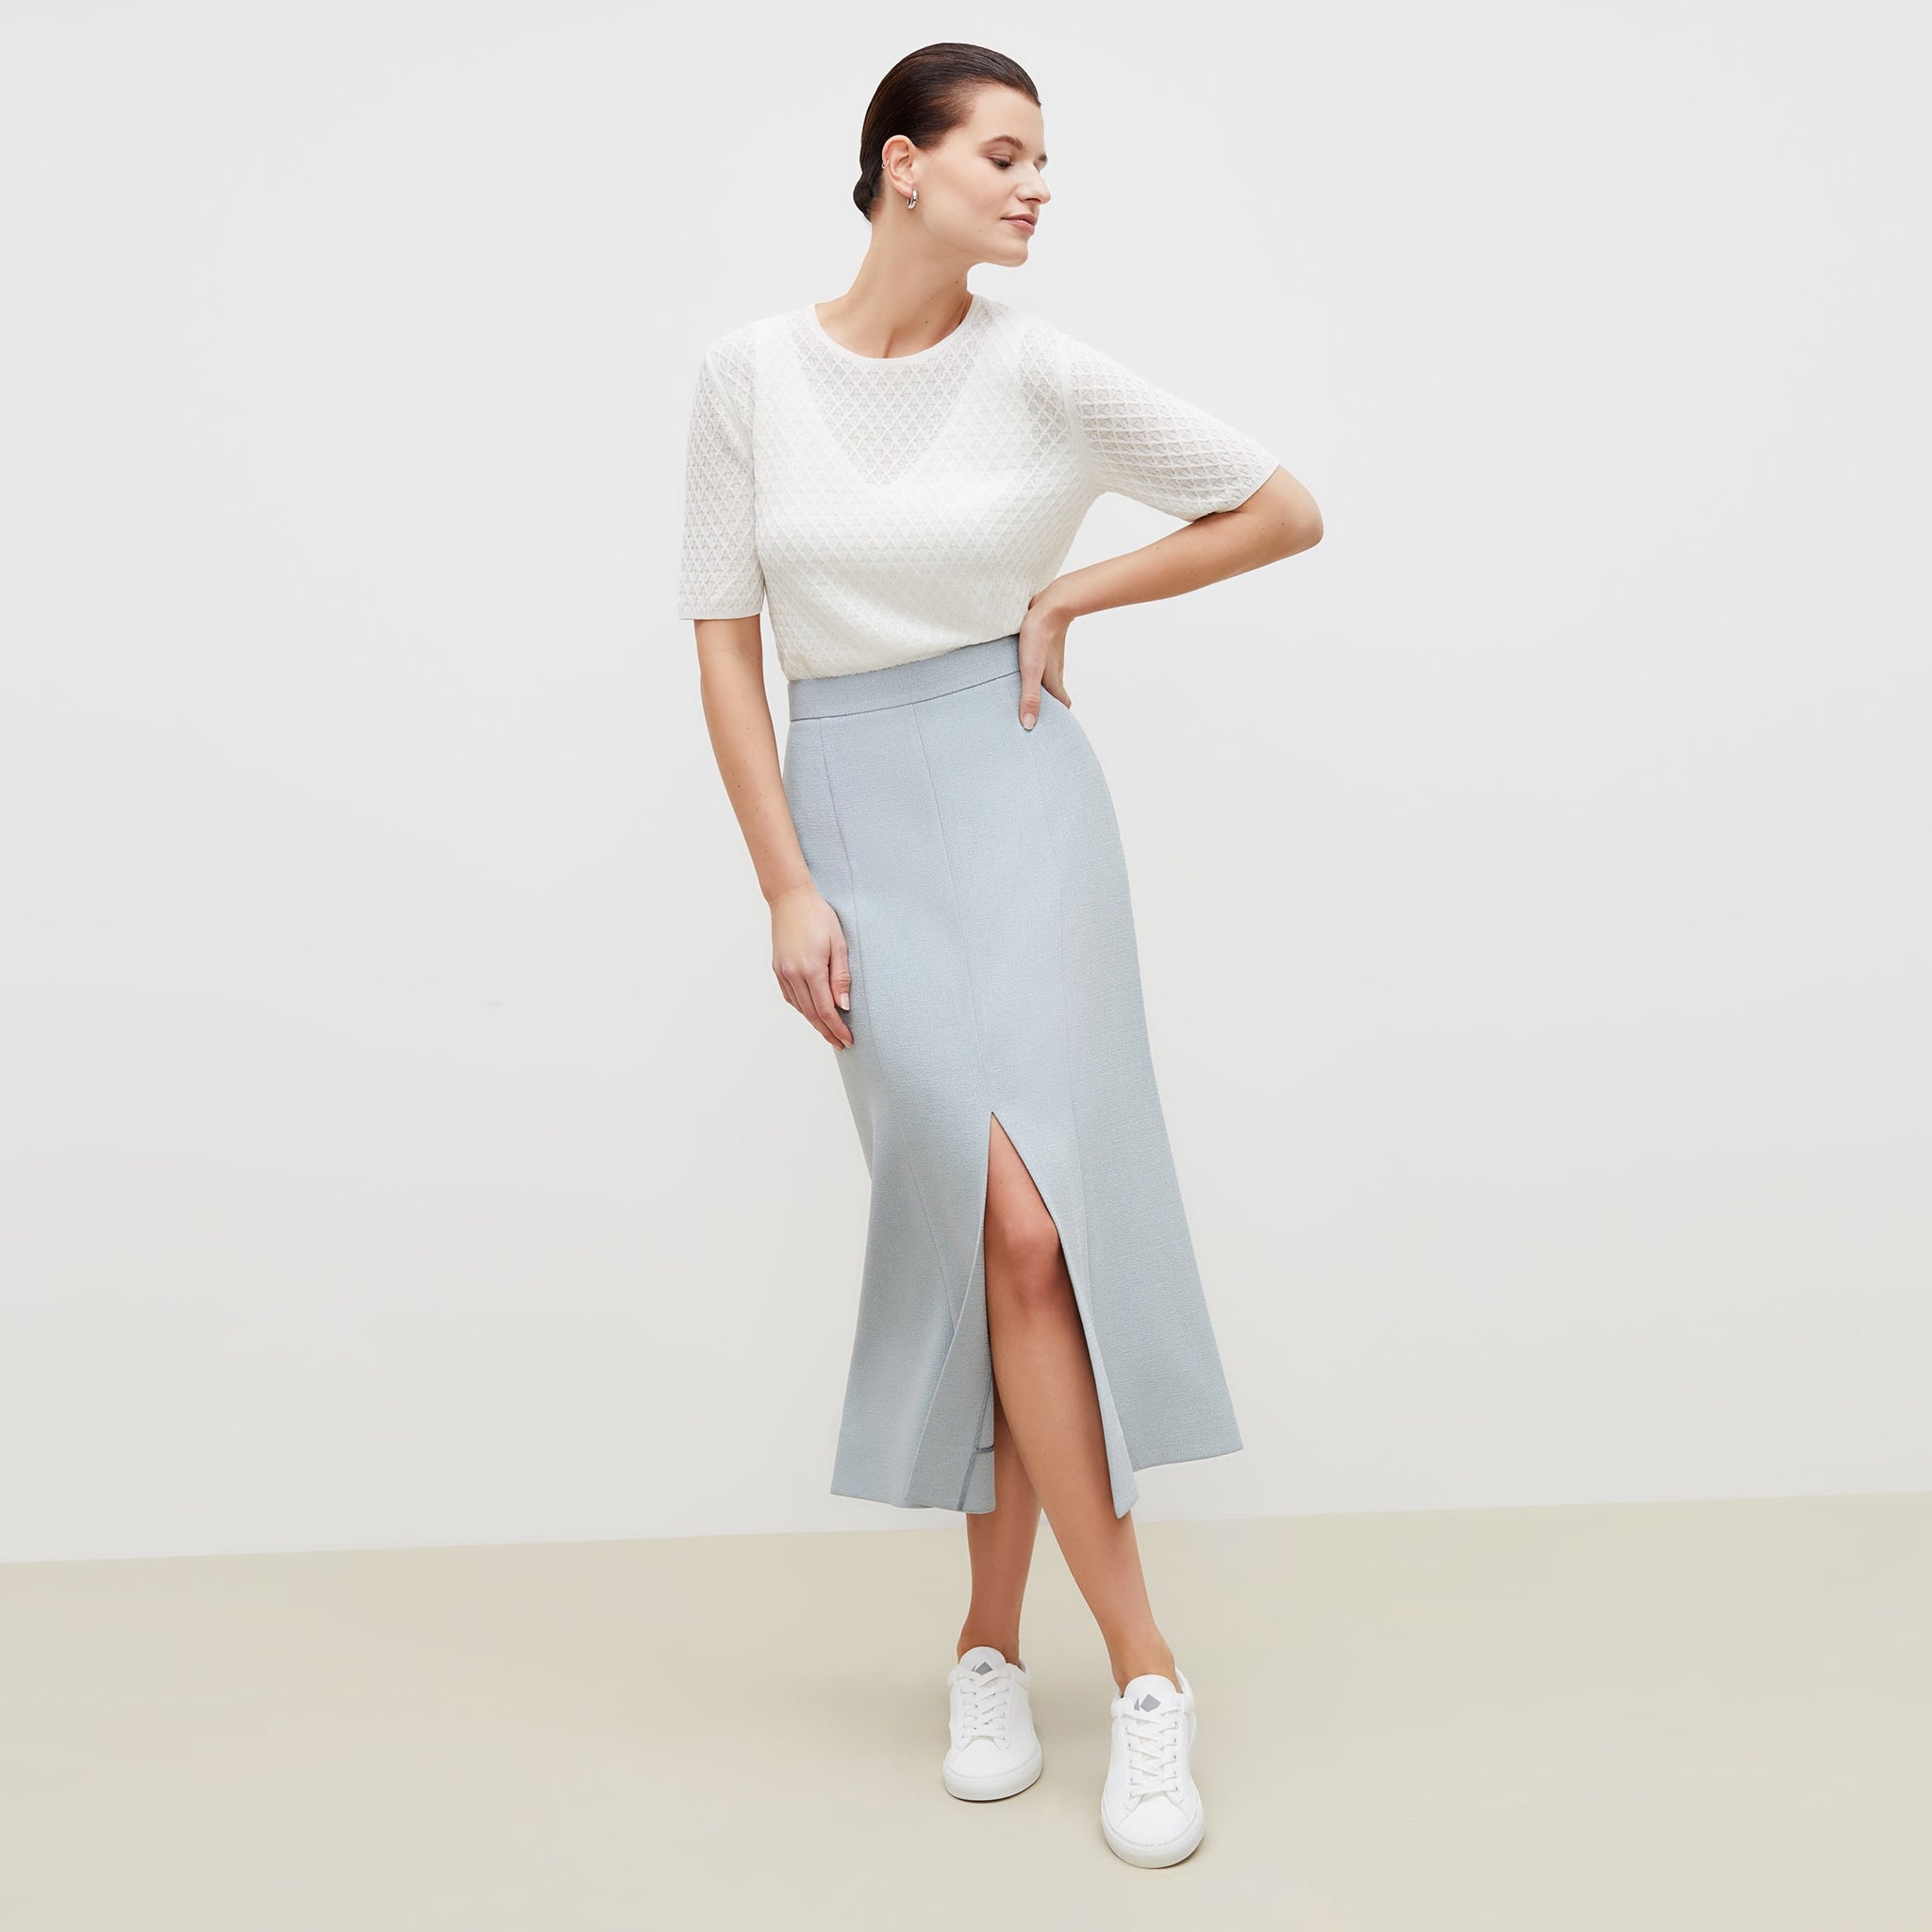 Front image of a woman standing wearing the eva skirt in textured suiting in powder blue